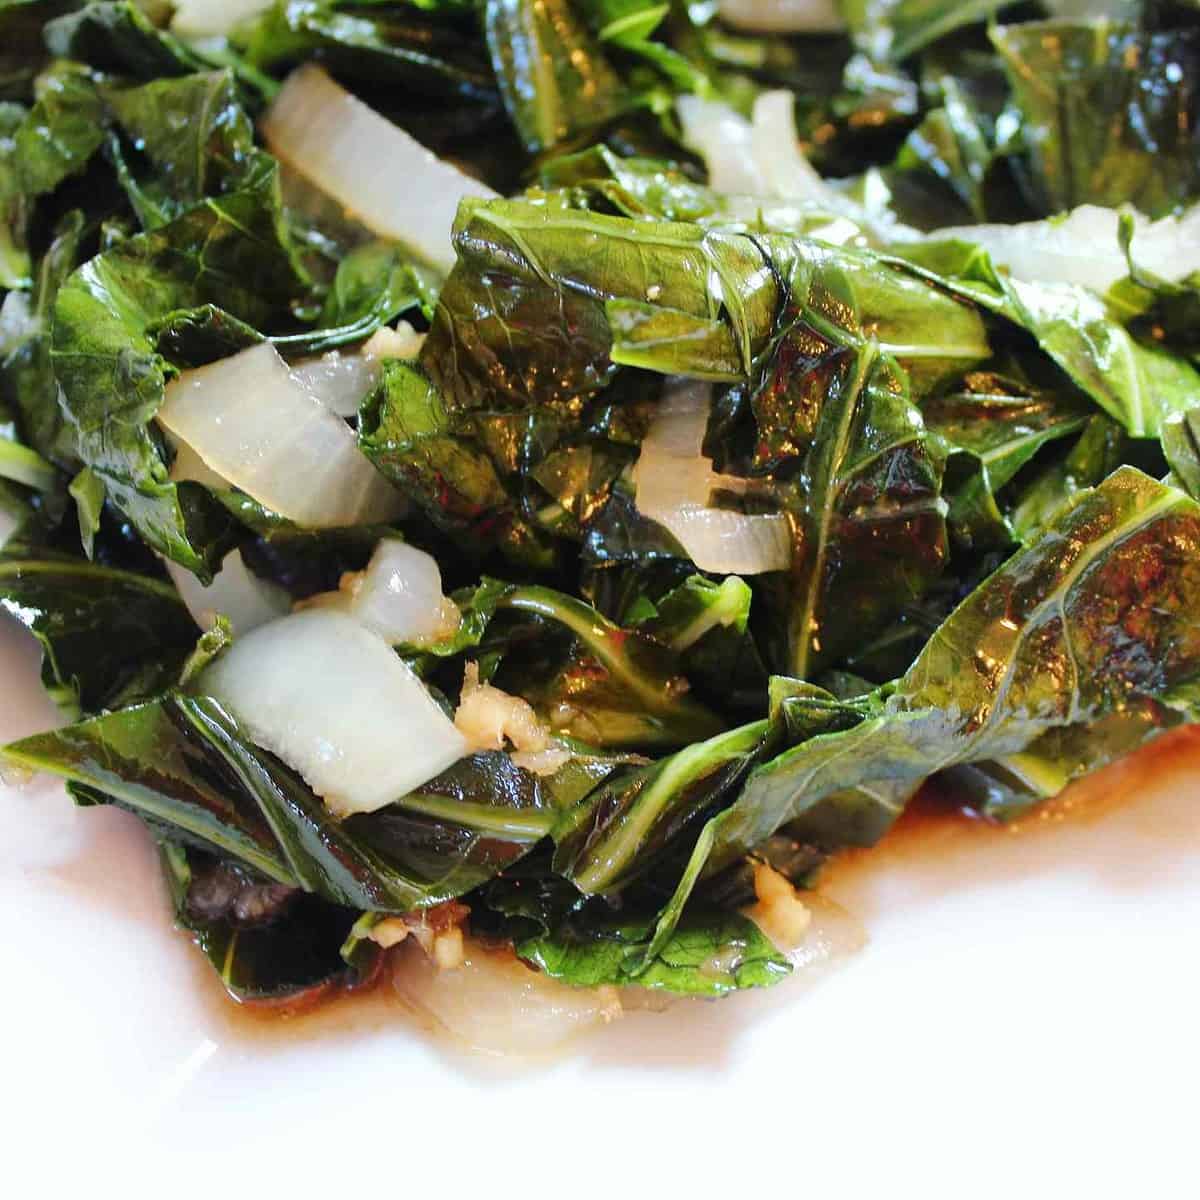  Get ready to spice up your life with these tangy 'n' spicy collard greens!